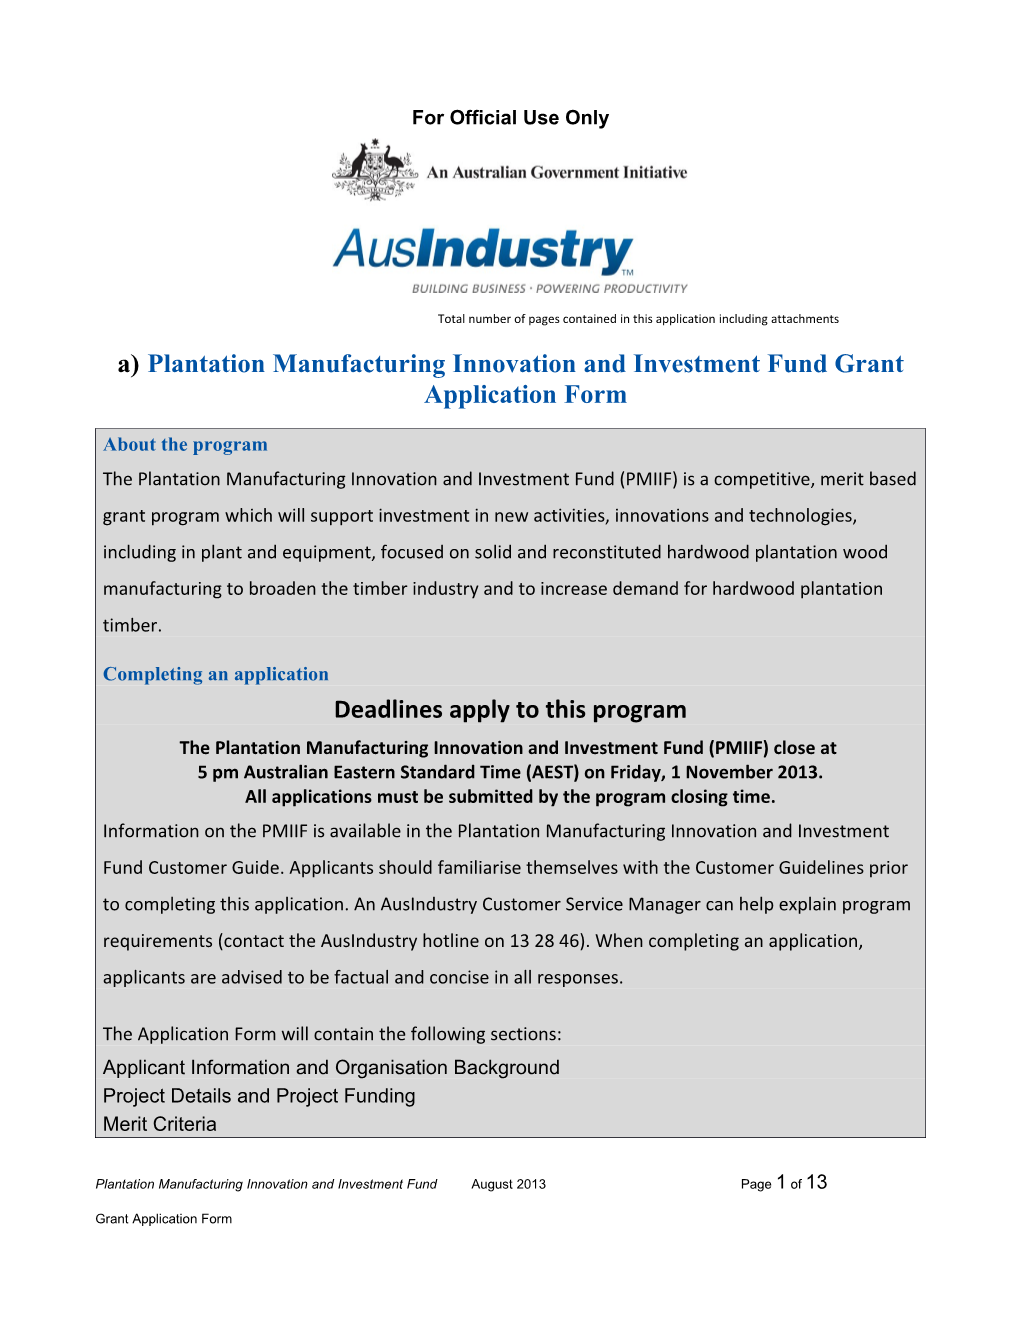 Plantation Manufacturing Innovation and Investment Fund Grant Application Form